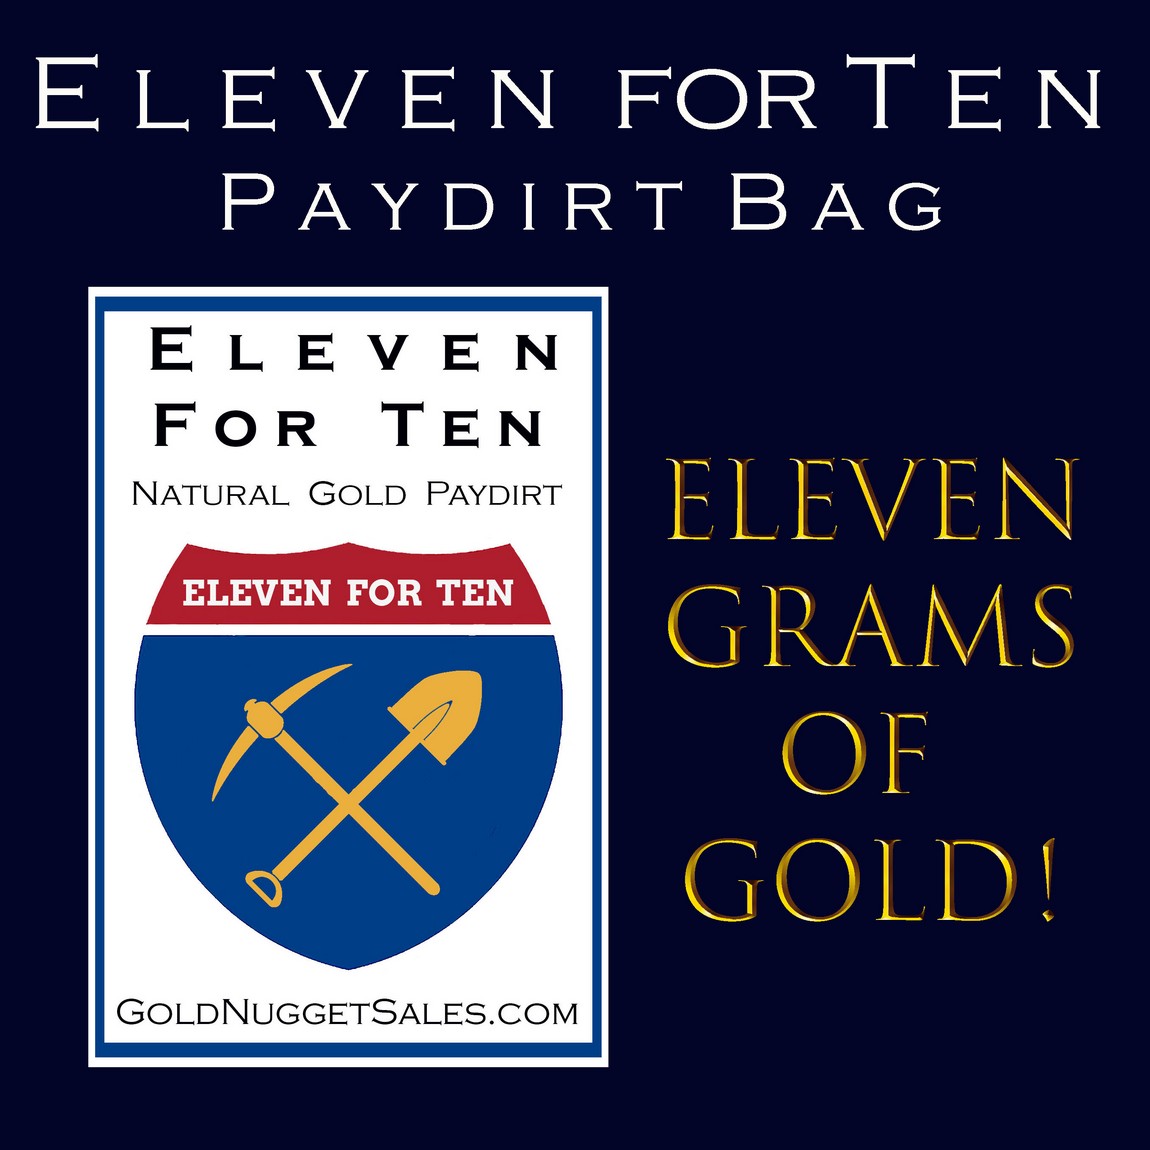 $10 Bag of Pay Dirt- with REAL GOLD